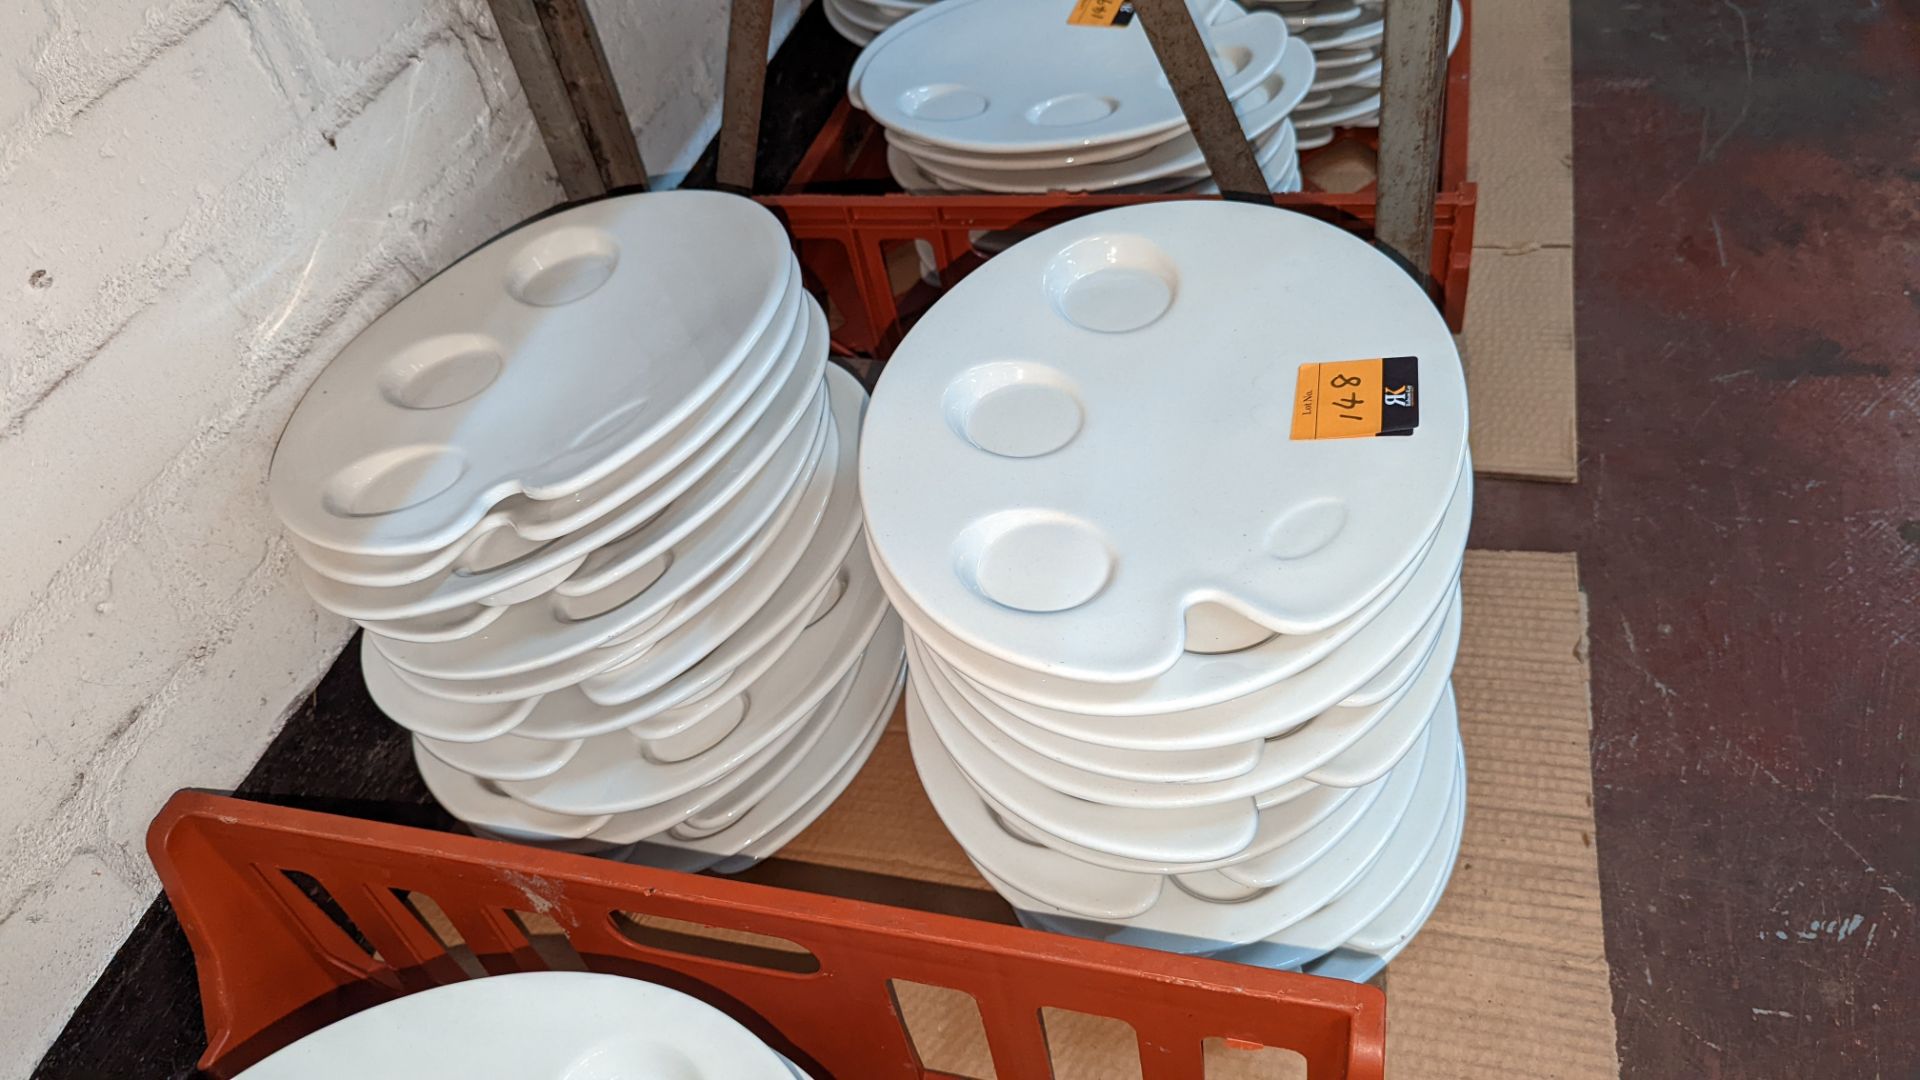 30 off Dudson artist's palette style plates/dishes, each measuring approximately 305mm x 250mm - Image 2 of 3